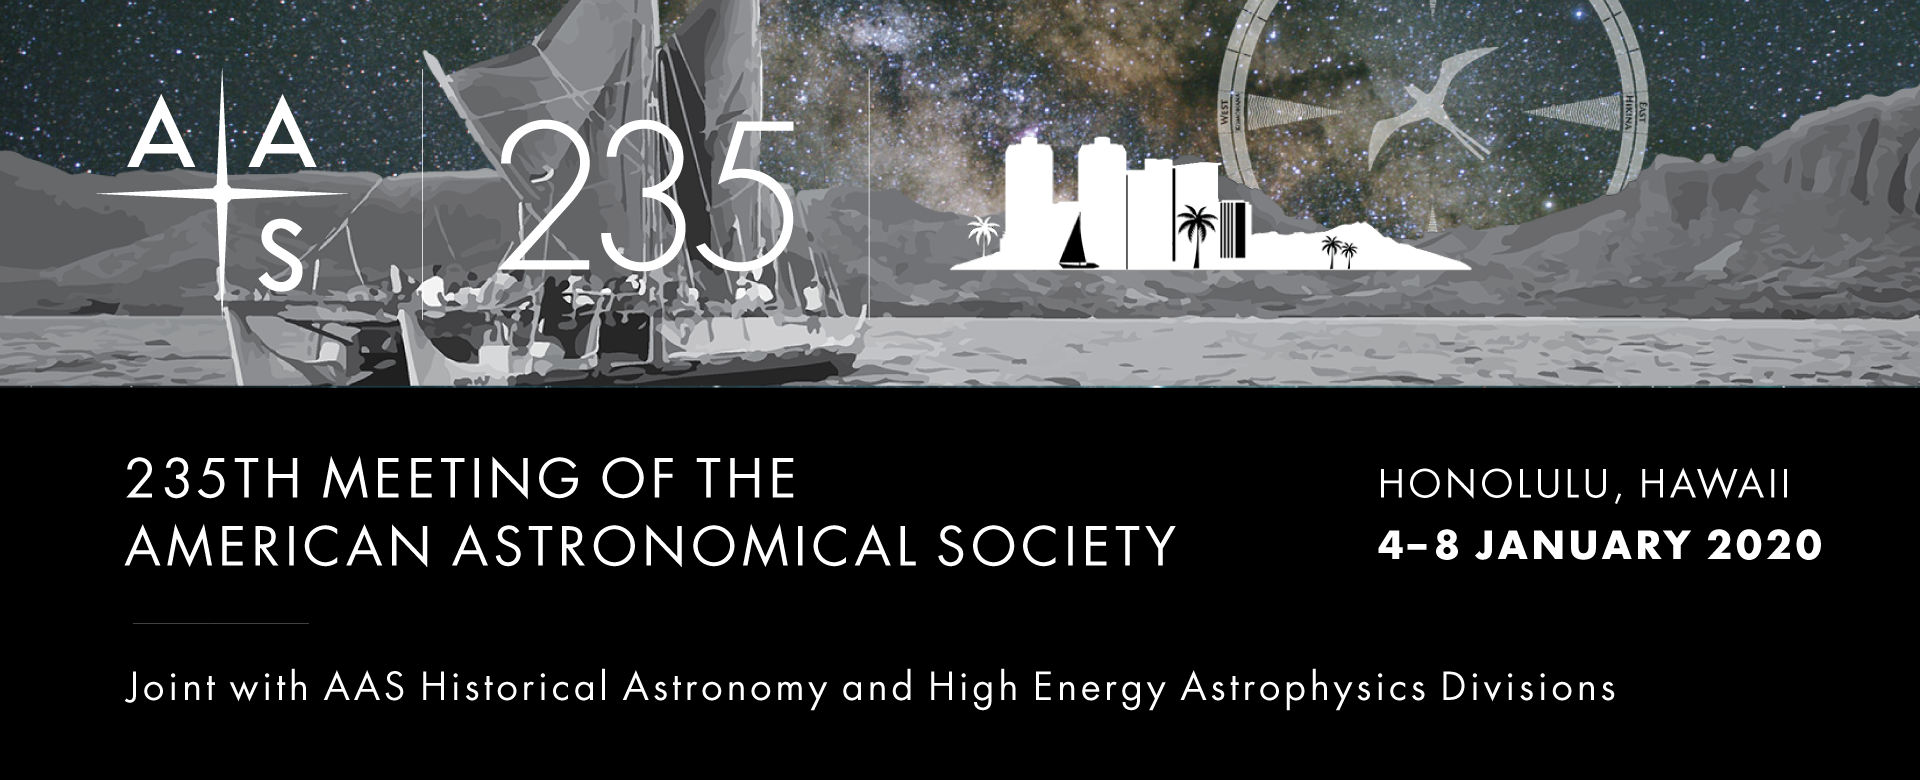 AAS 235 Banner